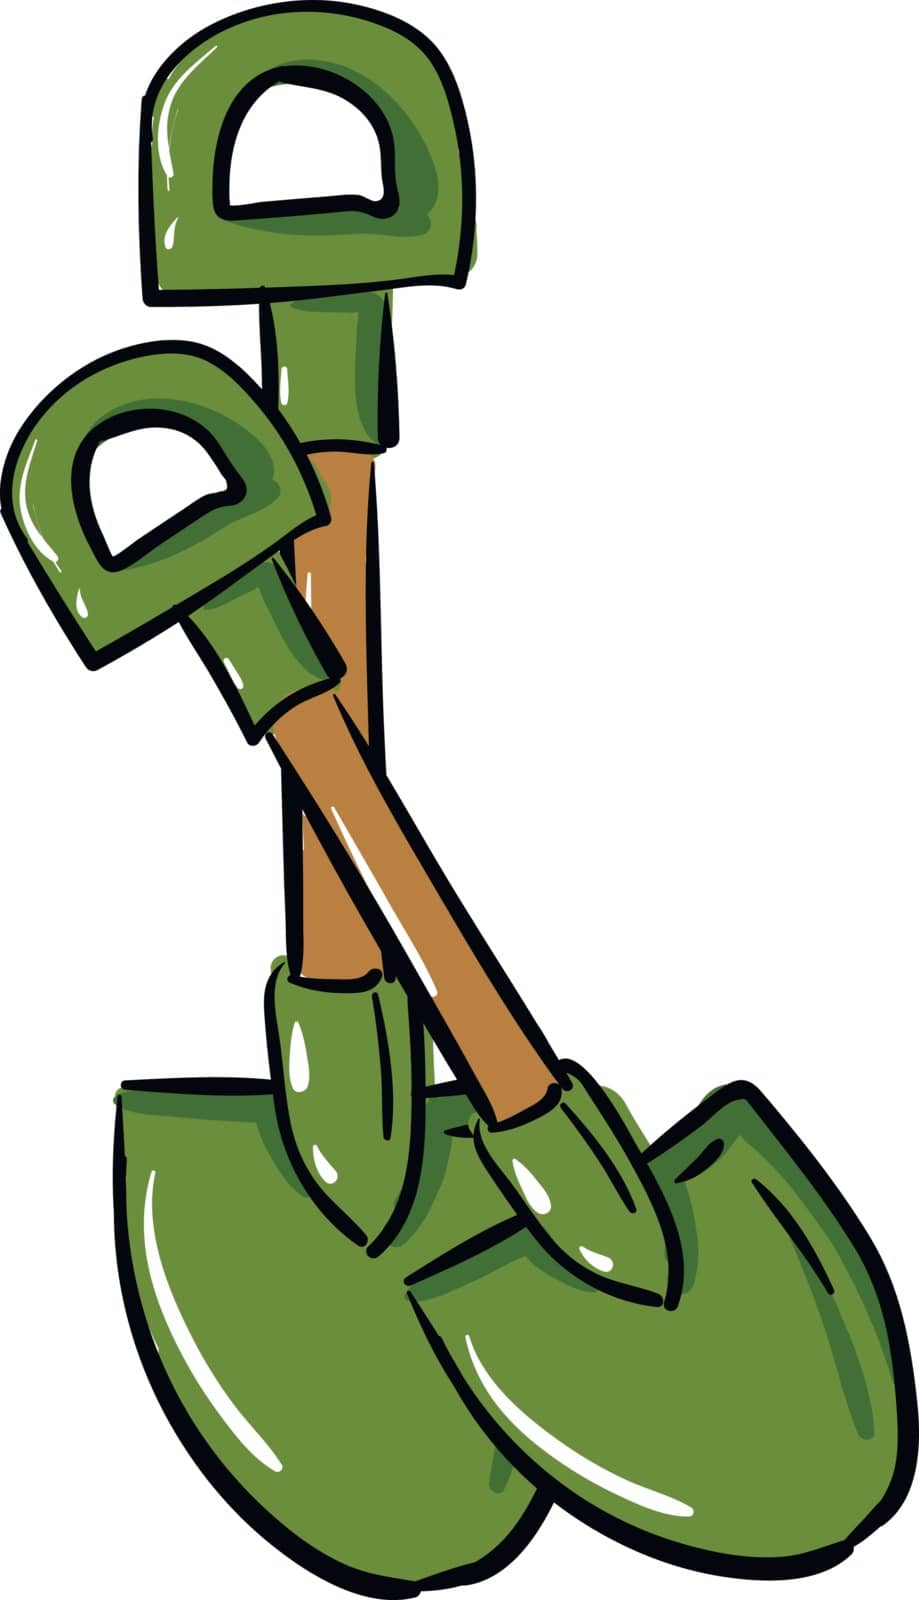 Green crossed shovels with handles illustration vector on white background